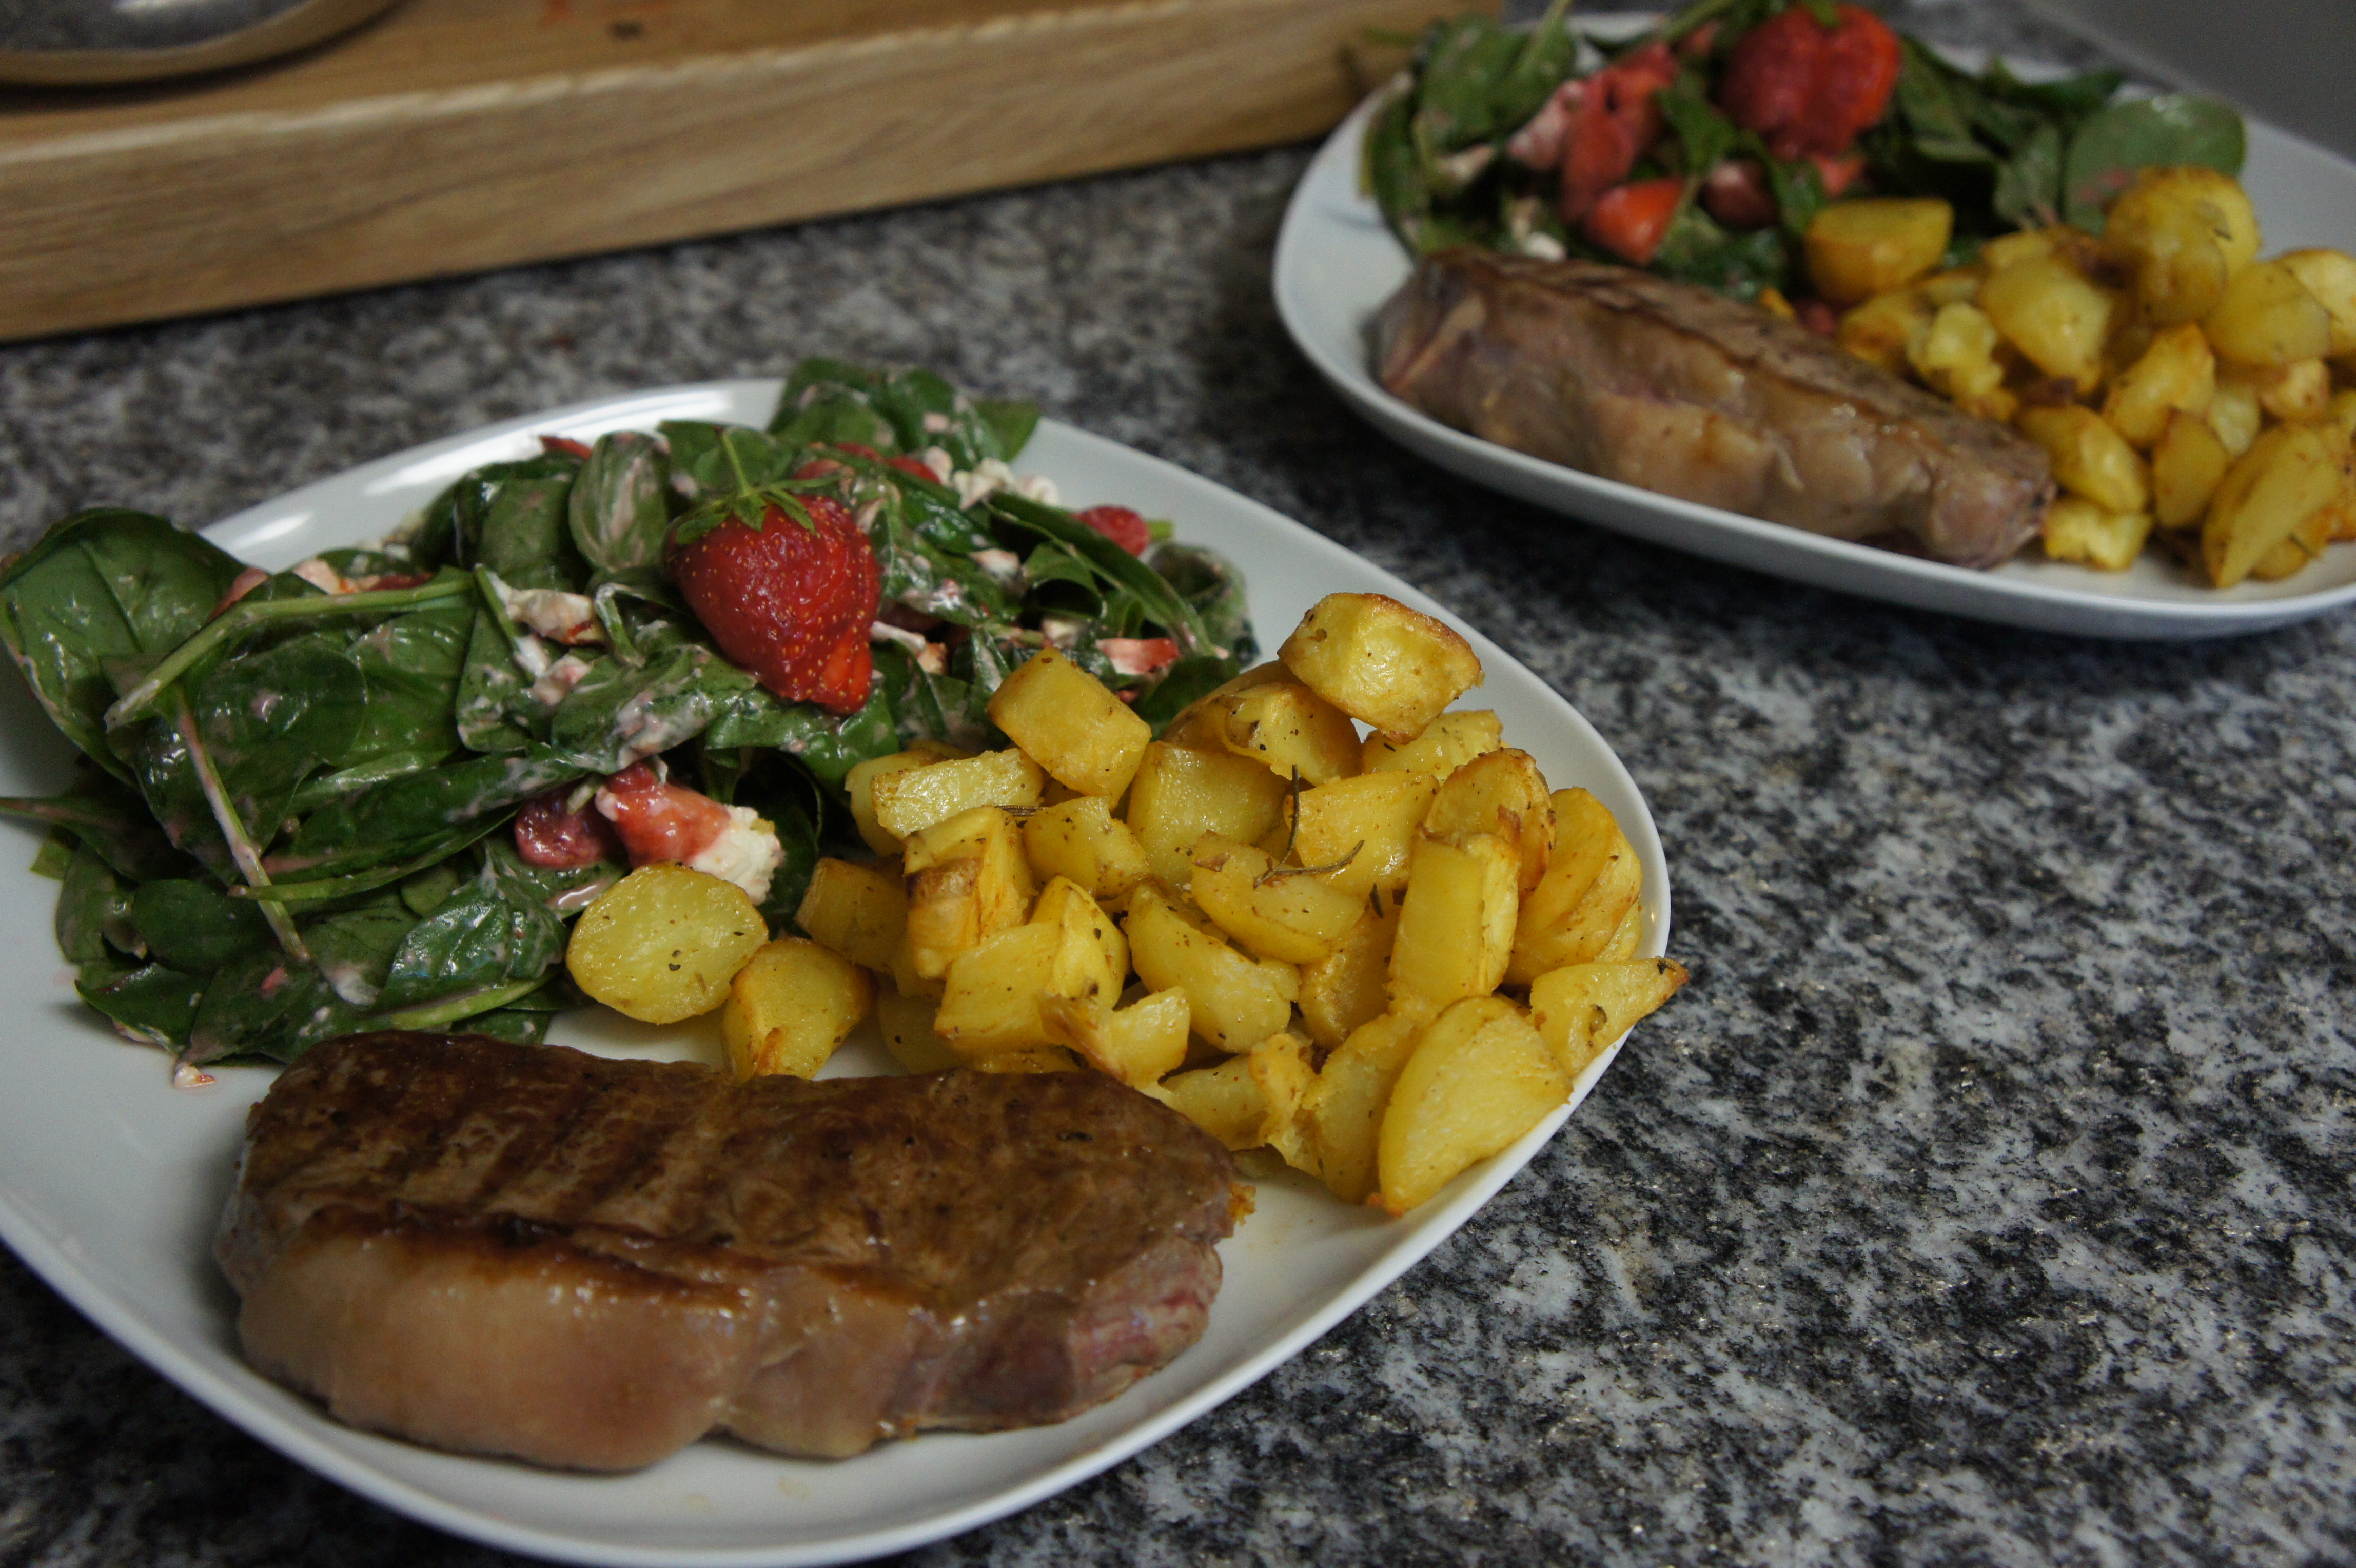 Salad with potatoes and steak